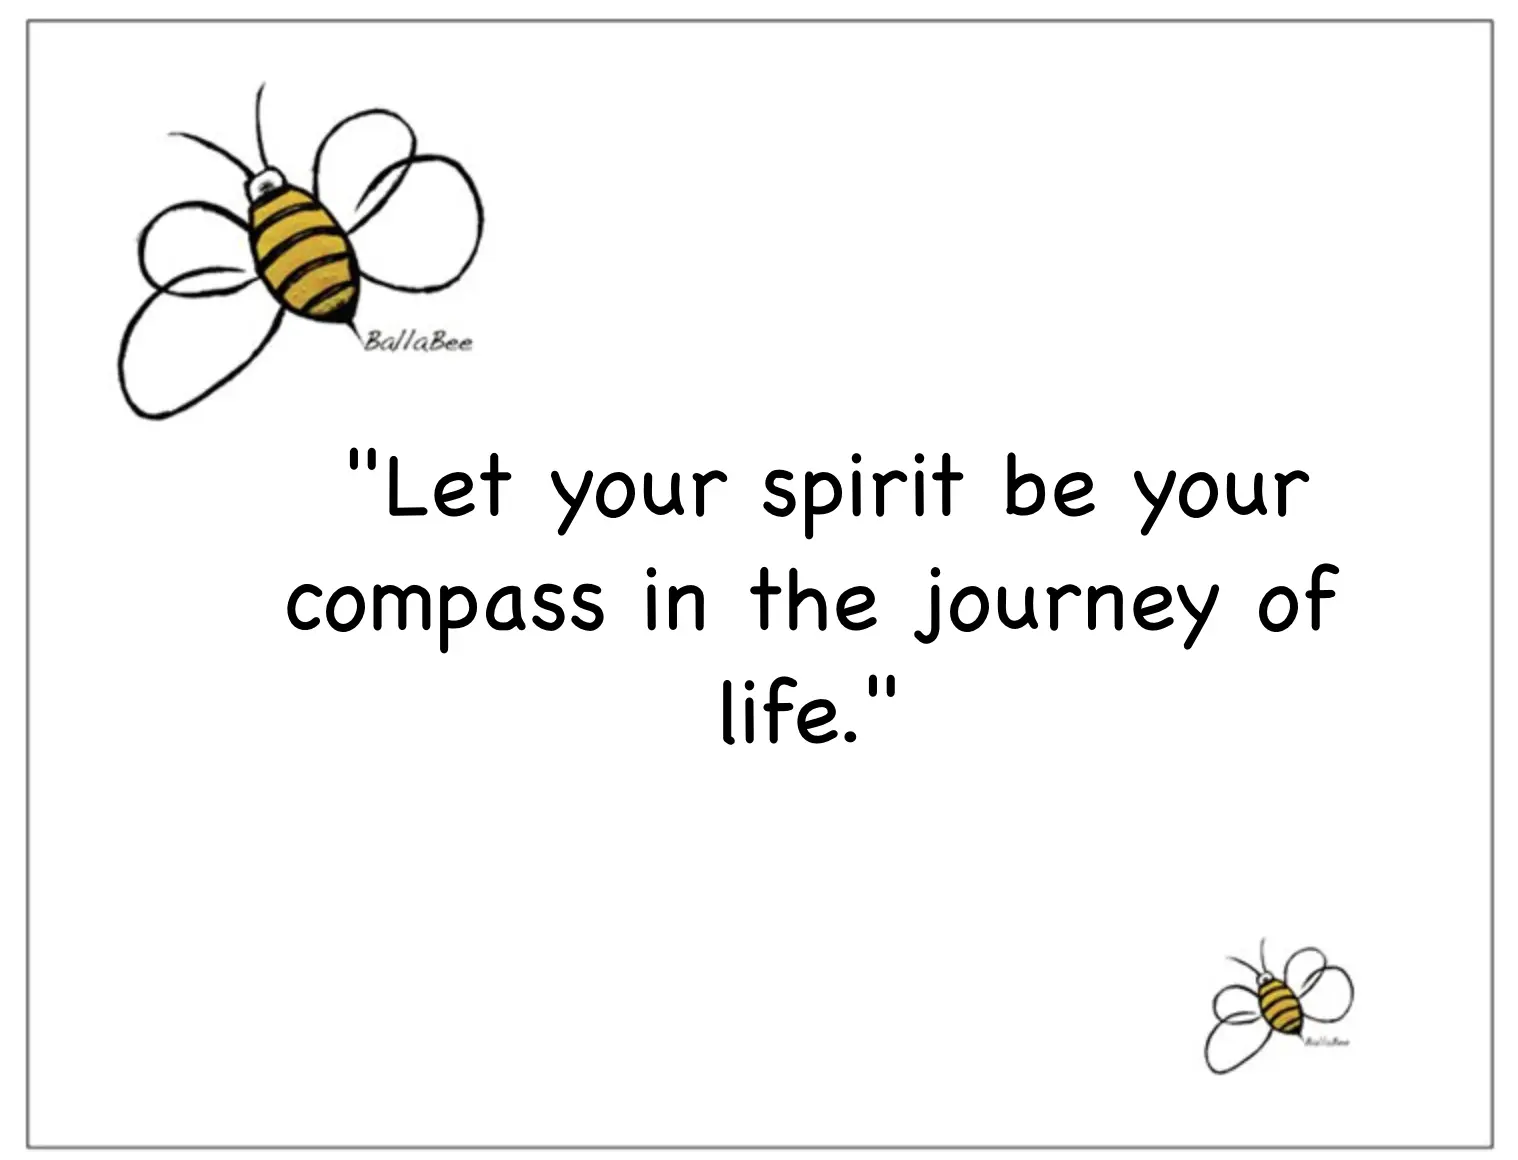 Let your spirit be your compass in the journey of life